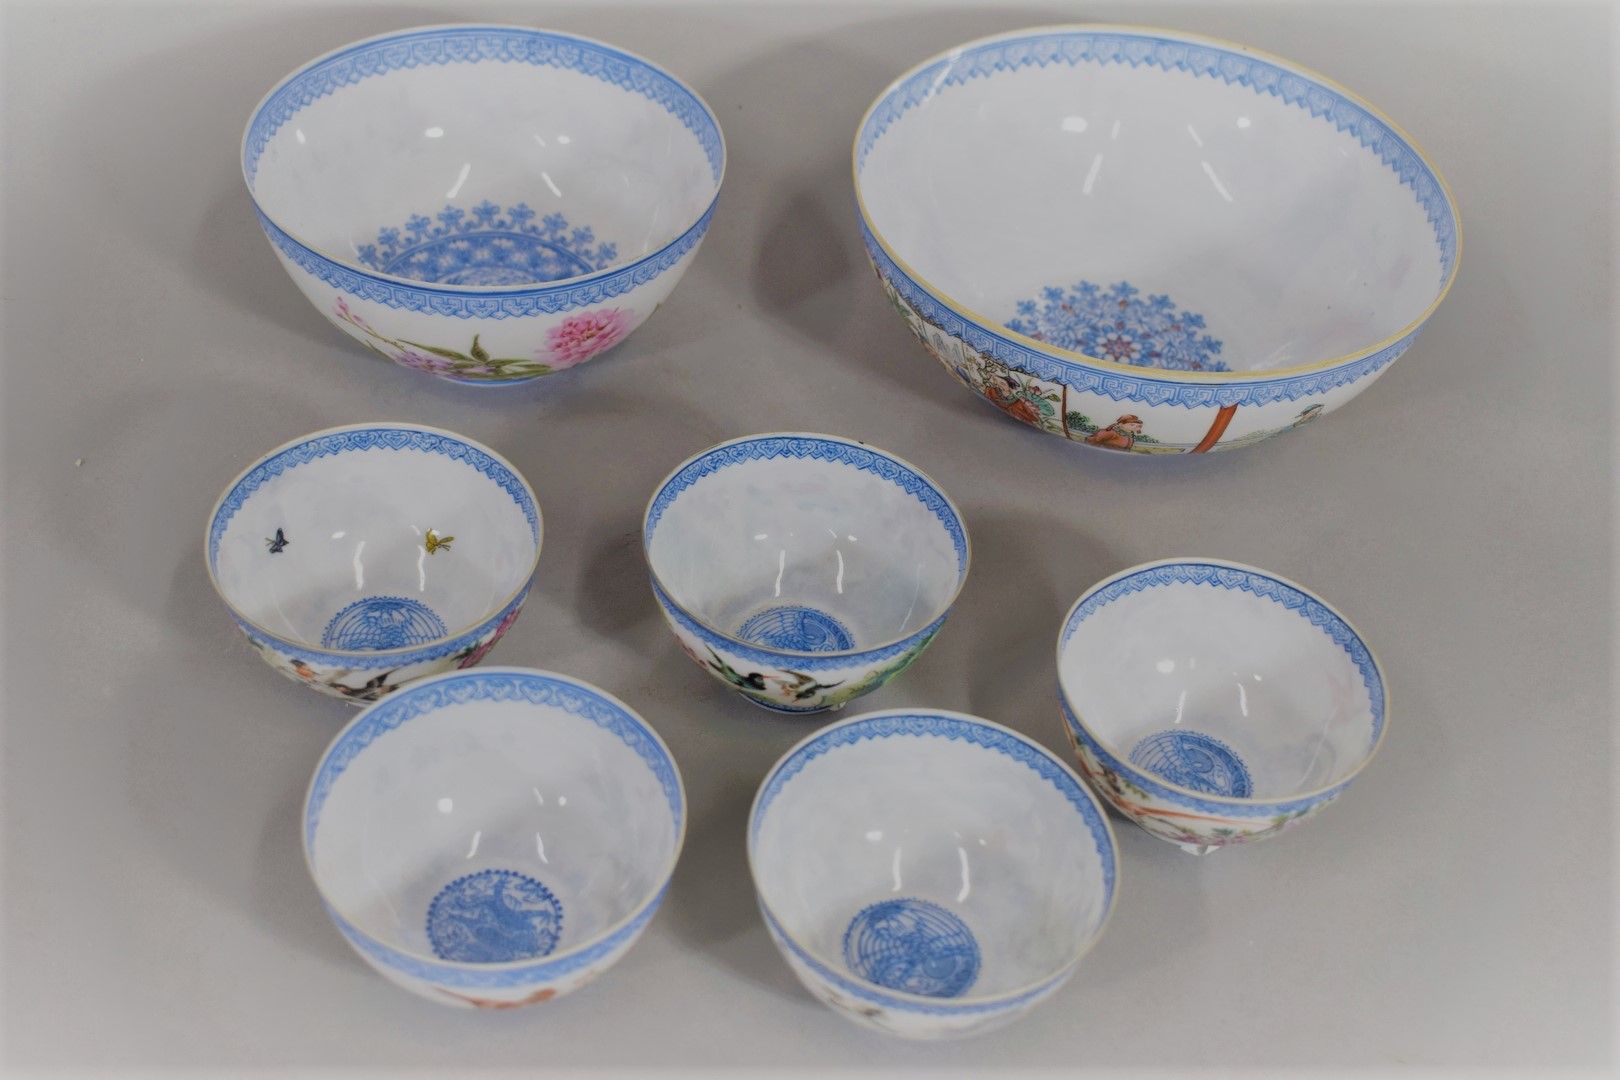 Null CHINA, 20th century

Set of seven porcelain bowls with polychrome enamel de&hellip;